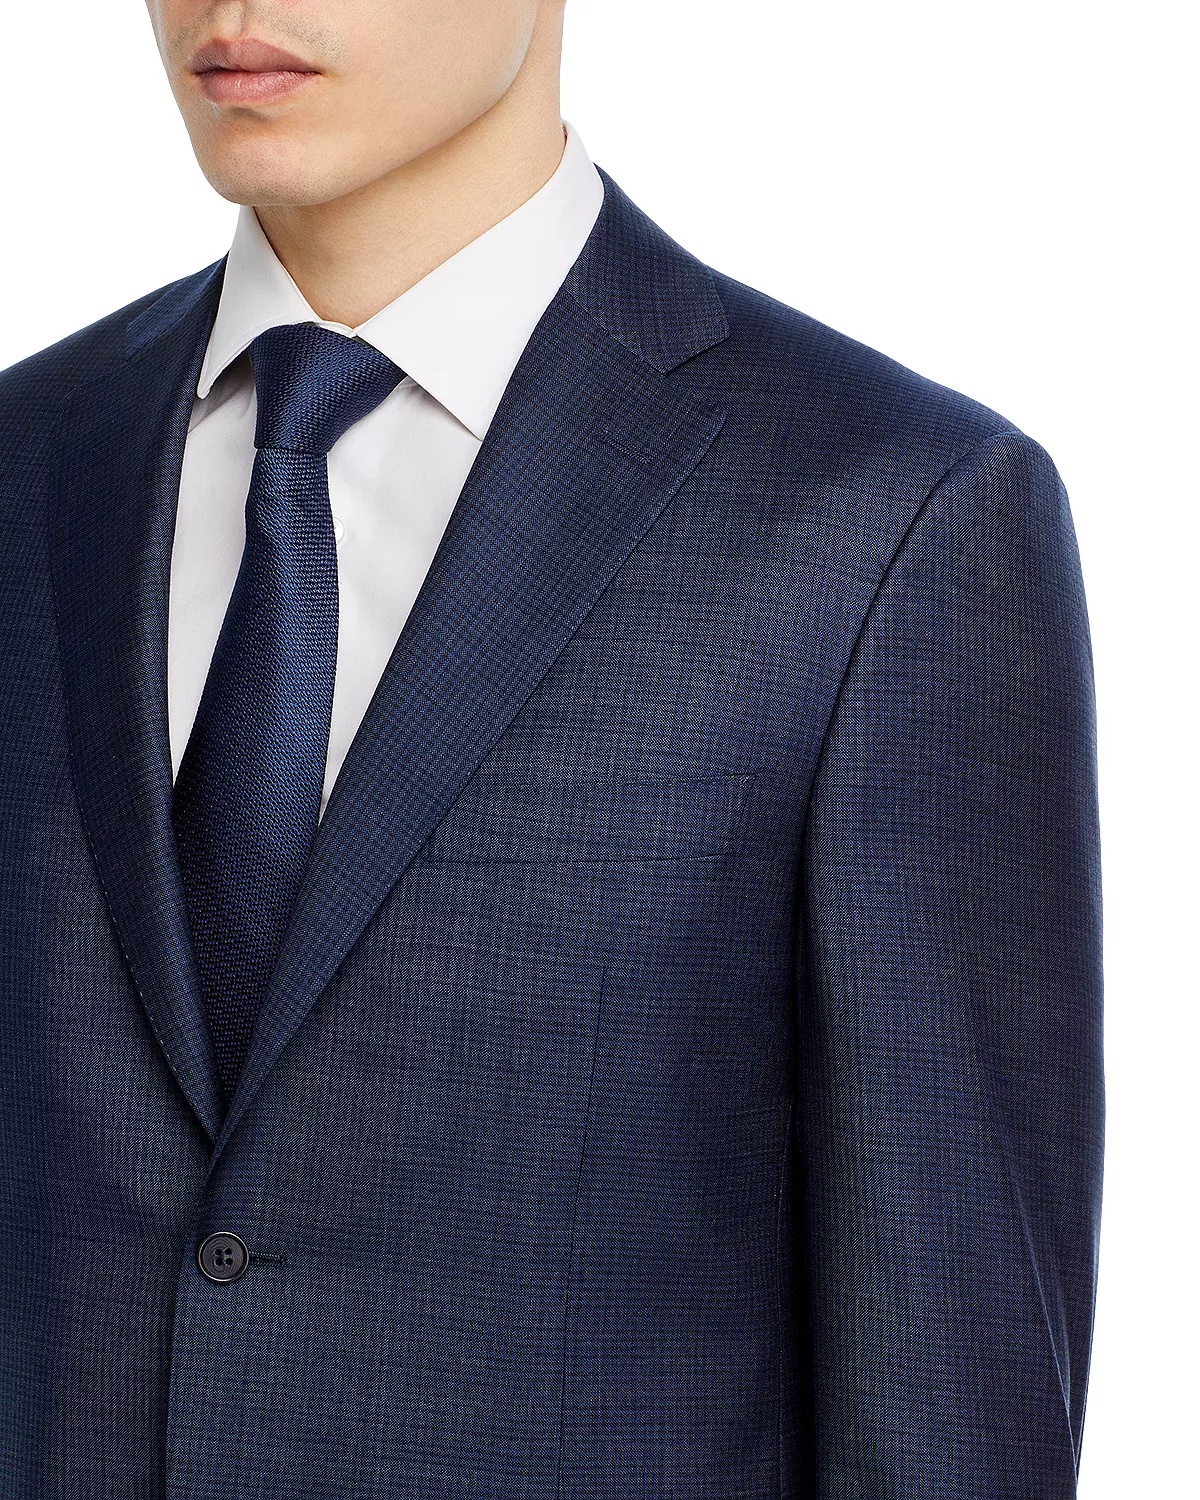 Siena Sharkskin Micro Check Classic Fit Suit - 5